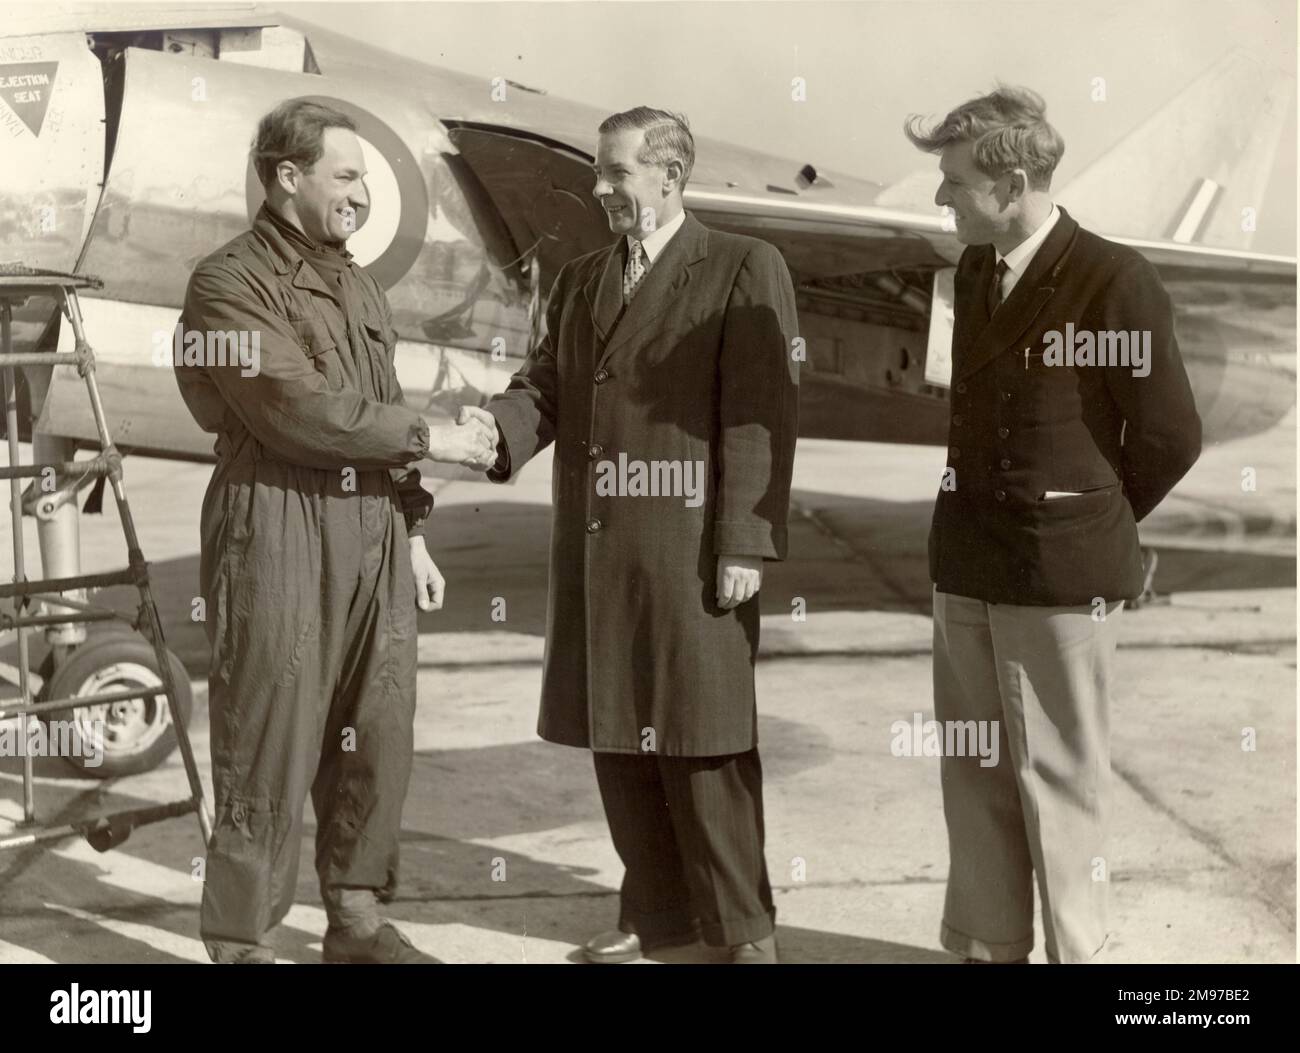 From left: Lionel Peter Twiss, OBE, DSC*, 1921-2011, is congratulated after establishing a new world air speed record in a Fairey Delta 2 by Robert Lockley, chief engineer, Fairey Aviation, who was responsible for the design of the aircraft and Maurice Childs, chief flight development engineer. Stock Photo